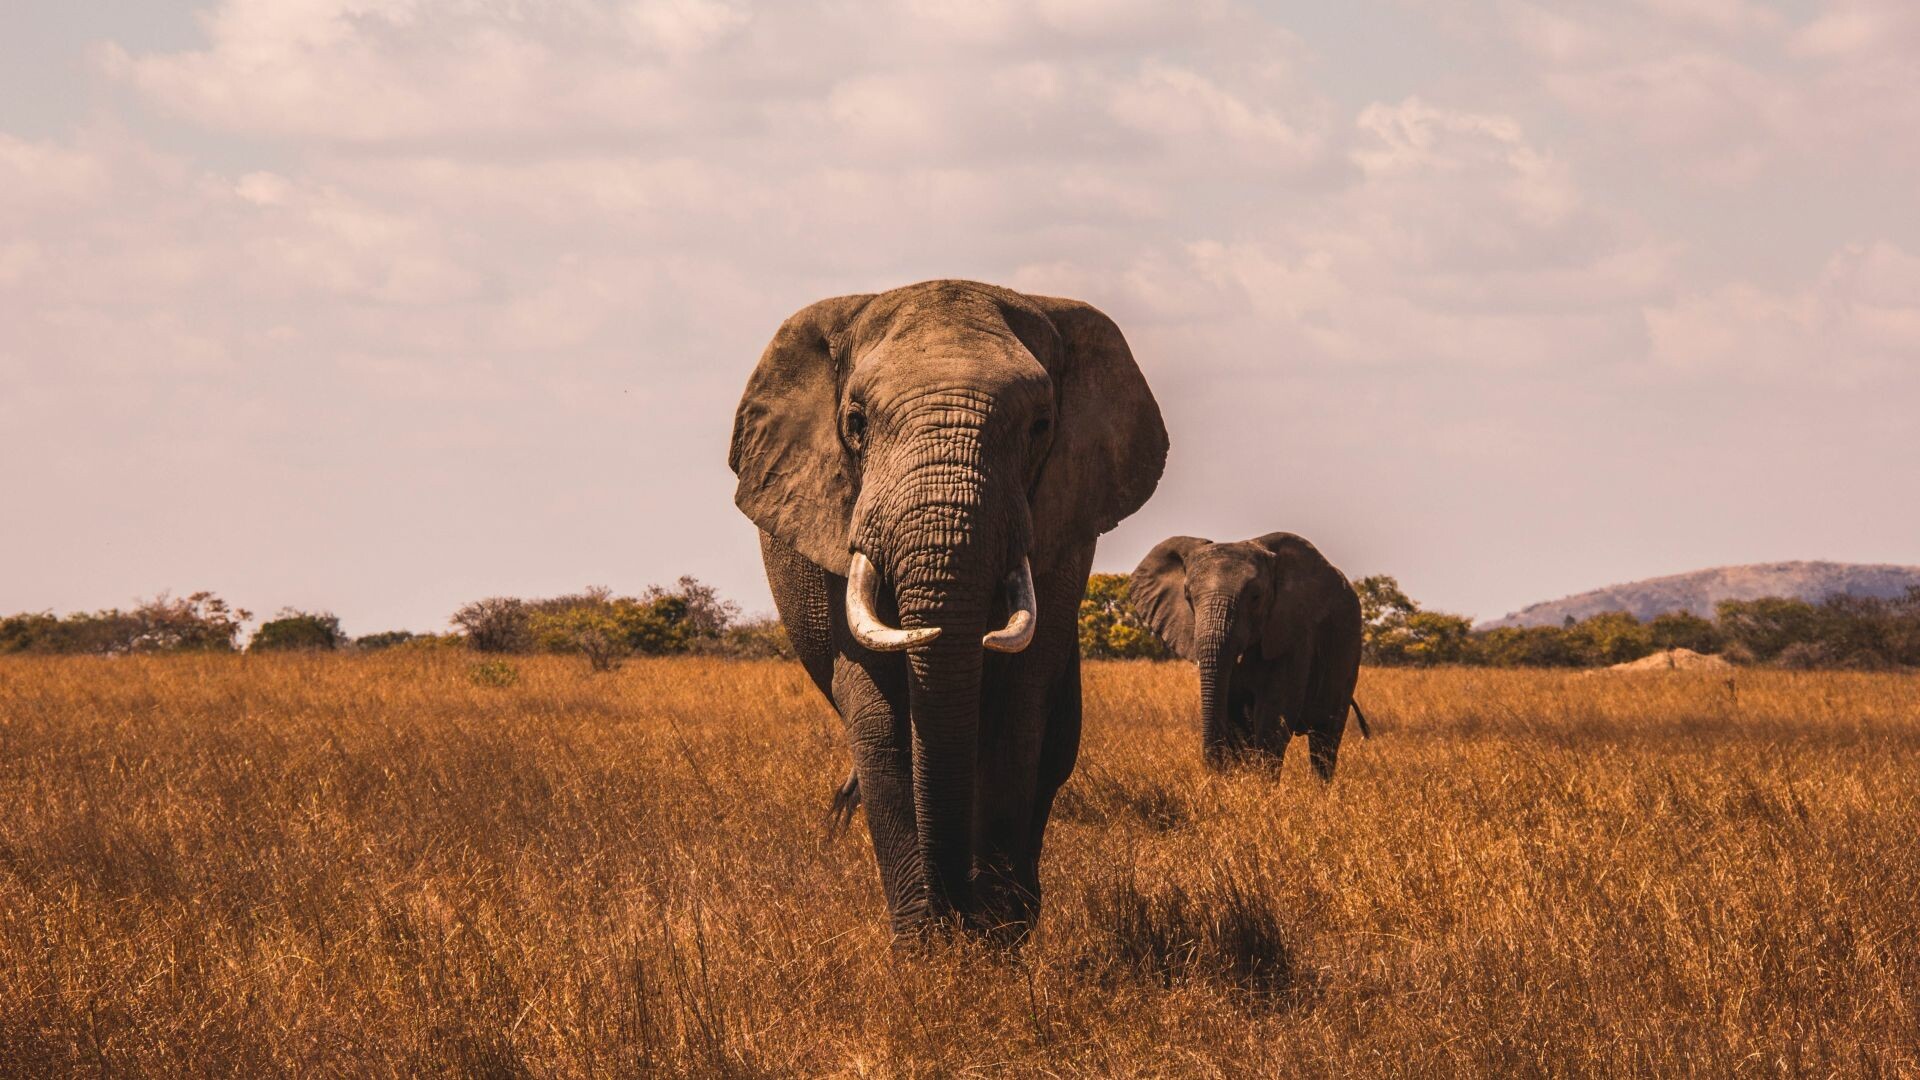 Elephant: The largest land mammals on earth, Distinctly massive bodies, large ears, and long trunks. 1920x1080 Full HD Background.